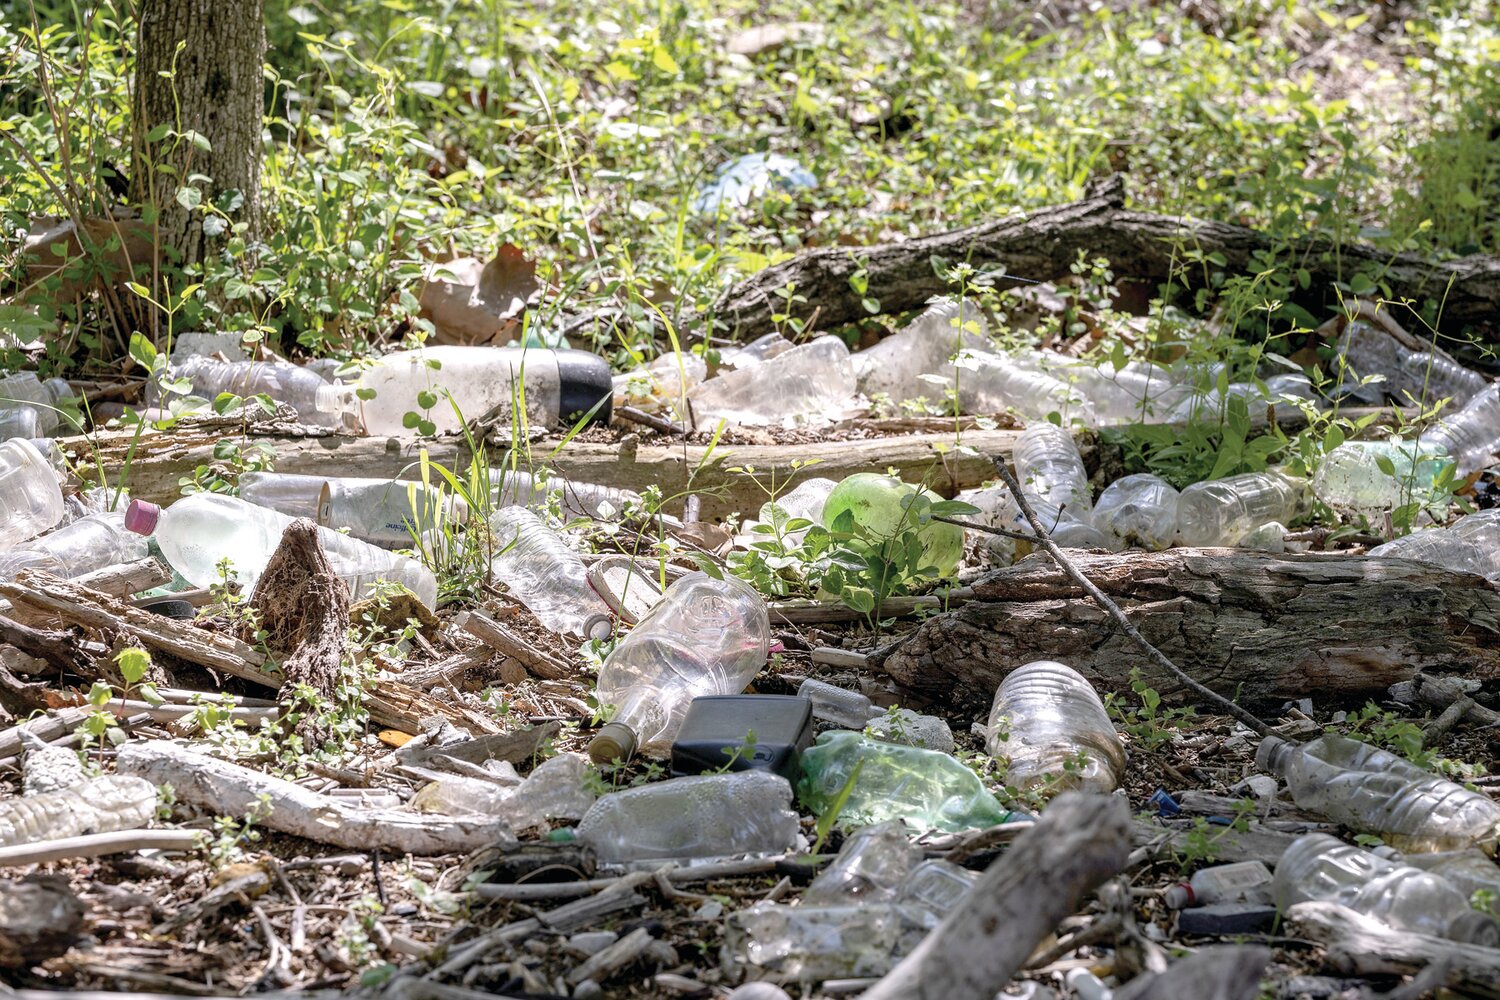 Single-use plastic waste awaits cleanup on Burlington Island in the Delaware River. Spearhead Project Earth’s goal is to clean 10,000 pounds of trash from Burlington Island and the Delaware River by the end of 2023.